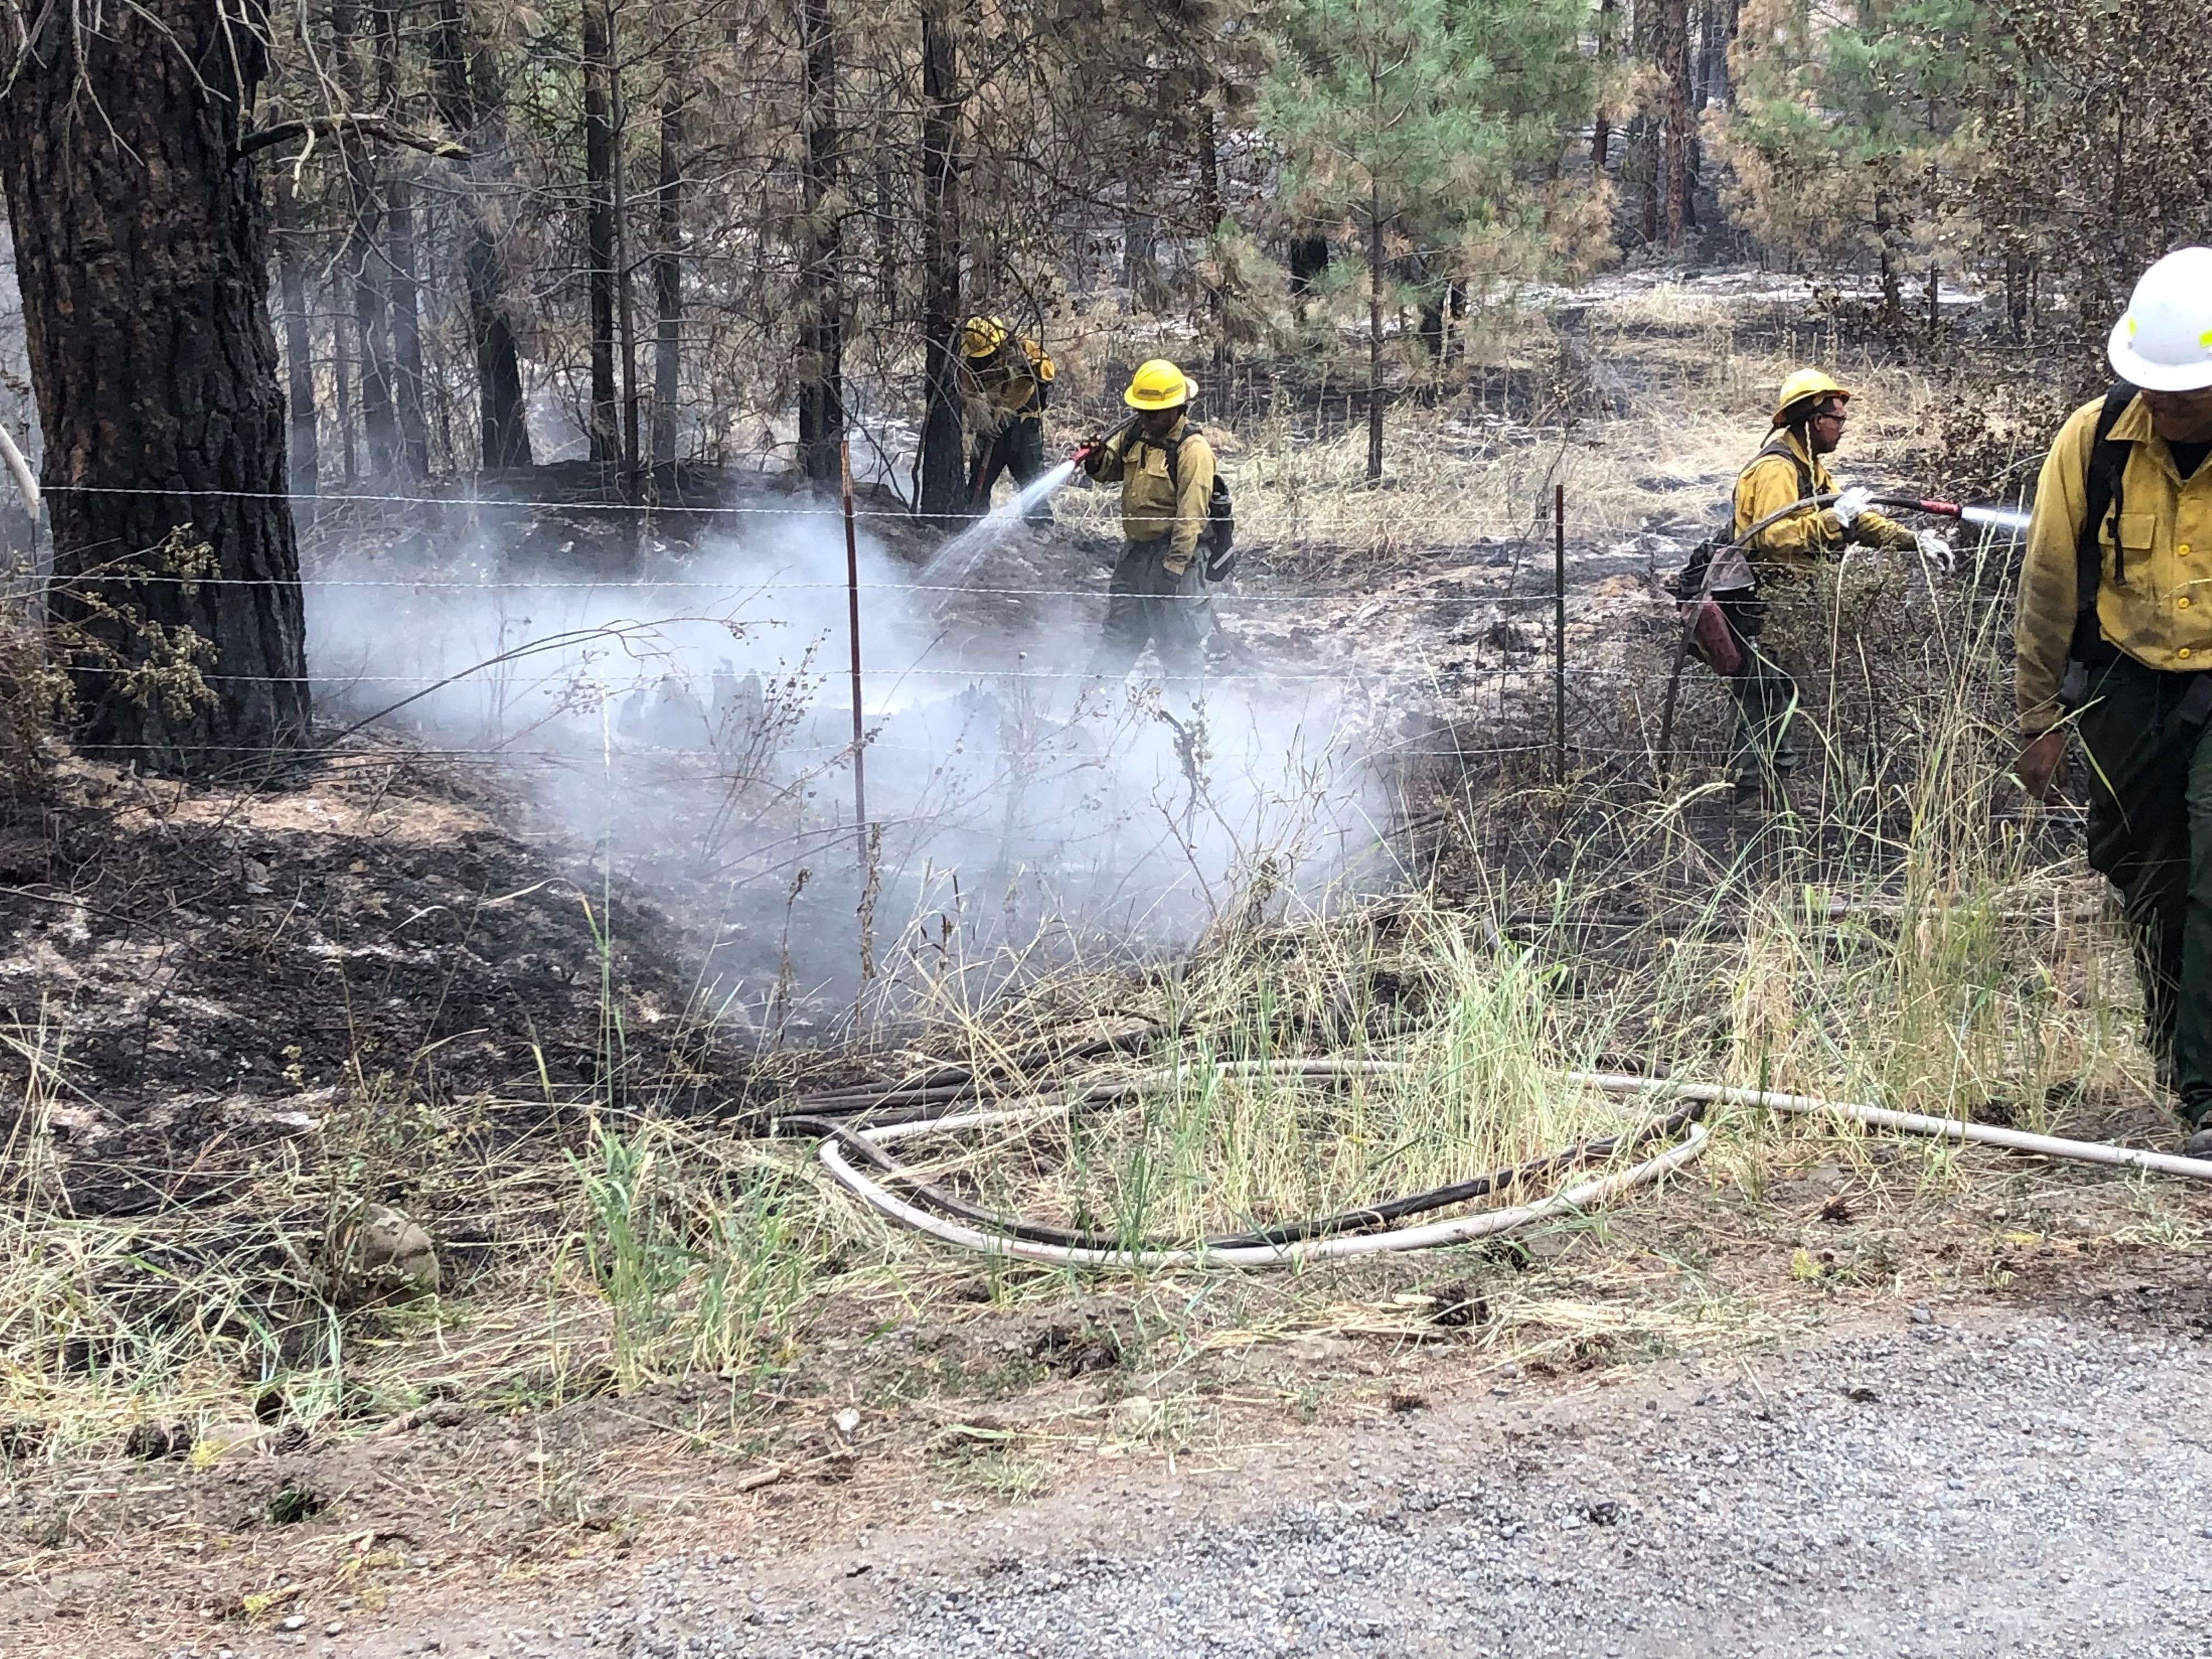 Firefighters are mopping up spraying water from a hose and mixing the water with dirt to fully extinguish the embers.